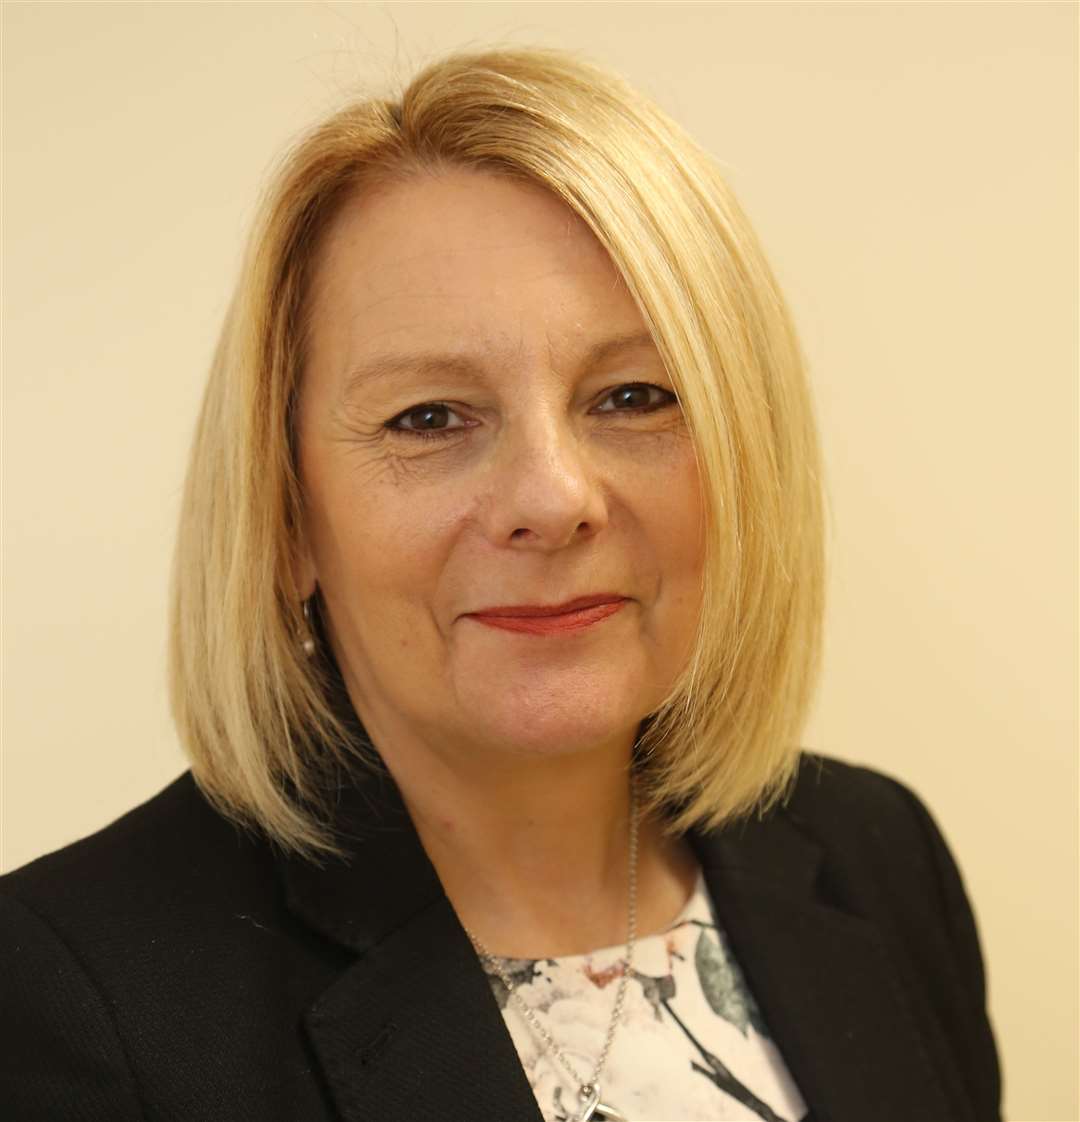 Jayne Black has been appointed as interim chief executive of Medway NHS Foundation Trust following the departure of Dr George Findlay. Photo: Medway NHS Foundation Trust